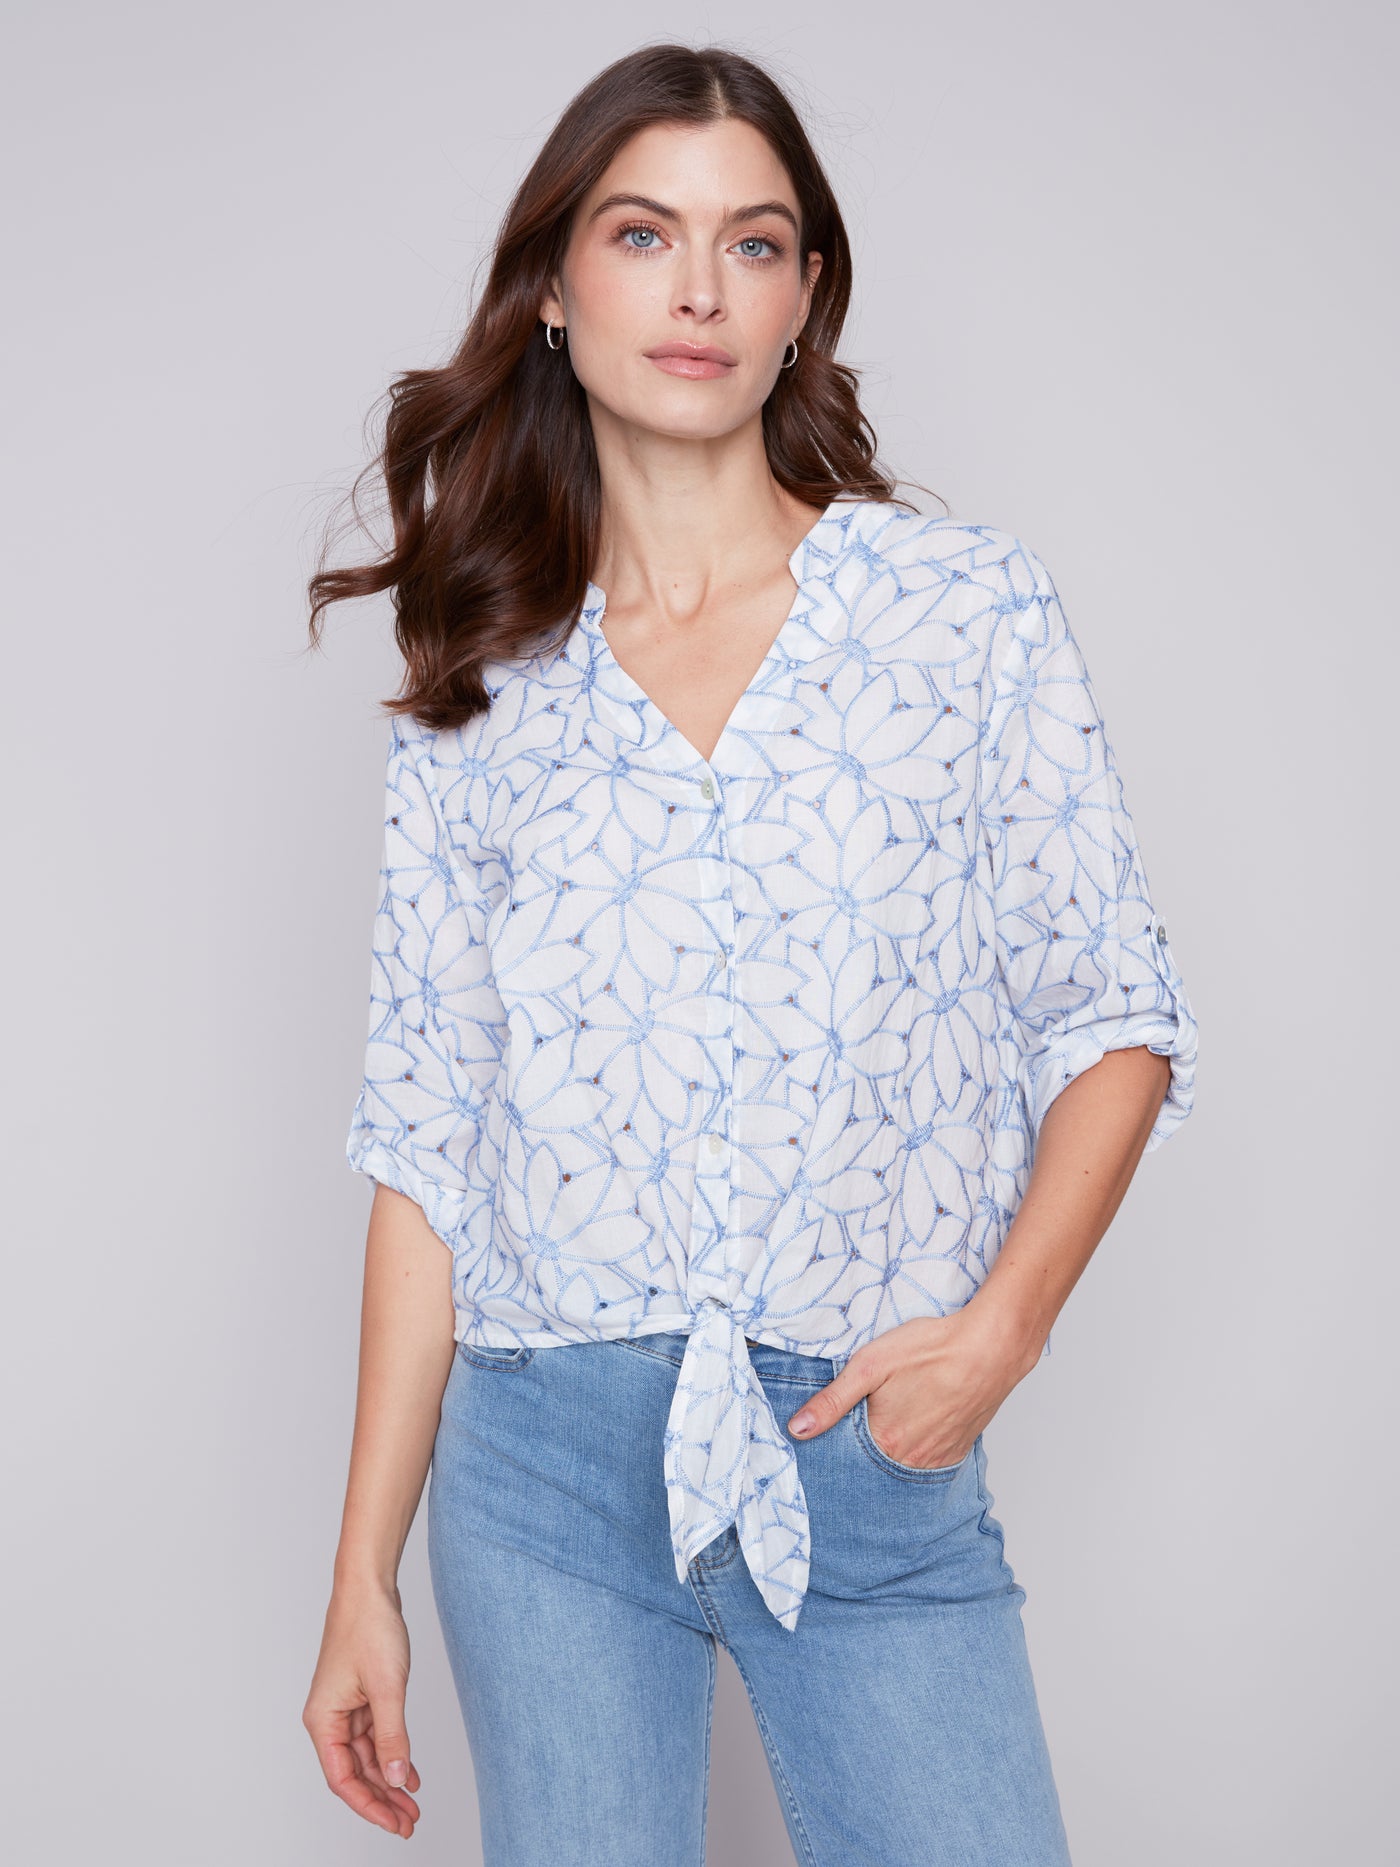 Charlie B Top - Embroidered Blouse - Sky